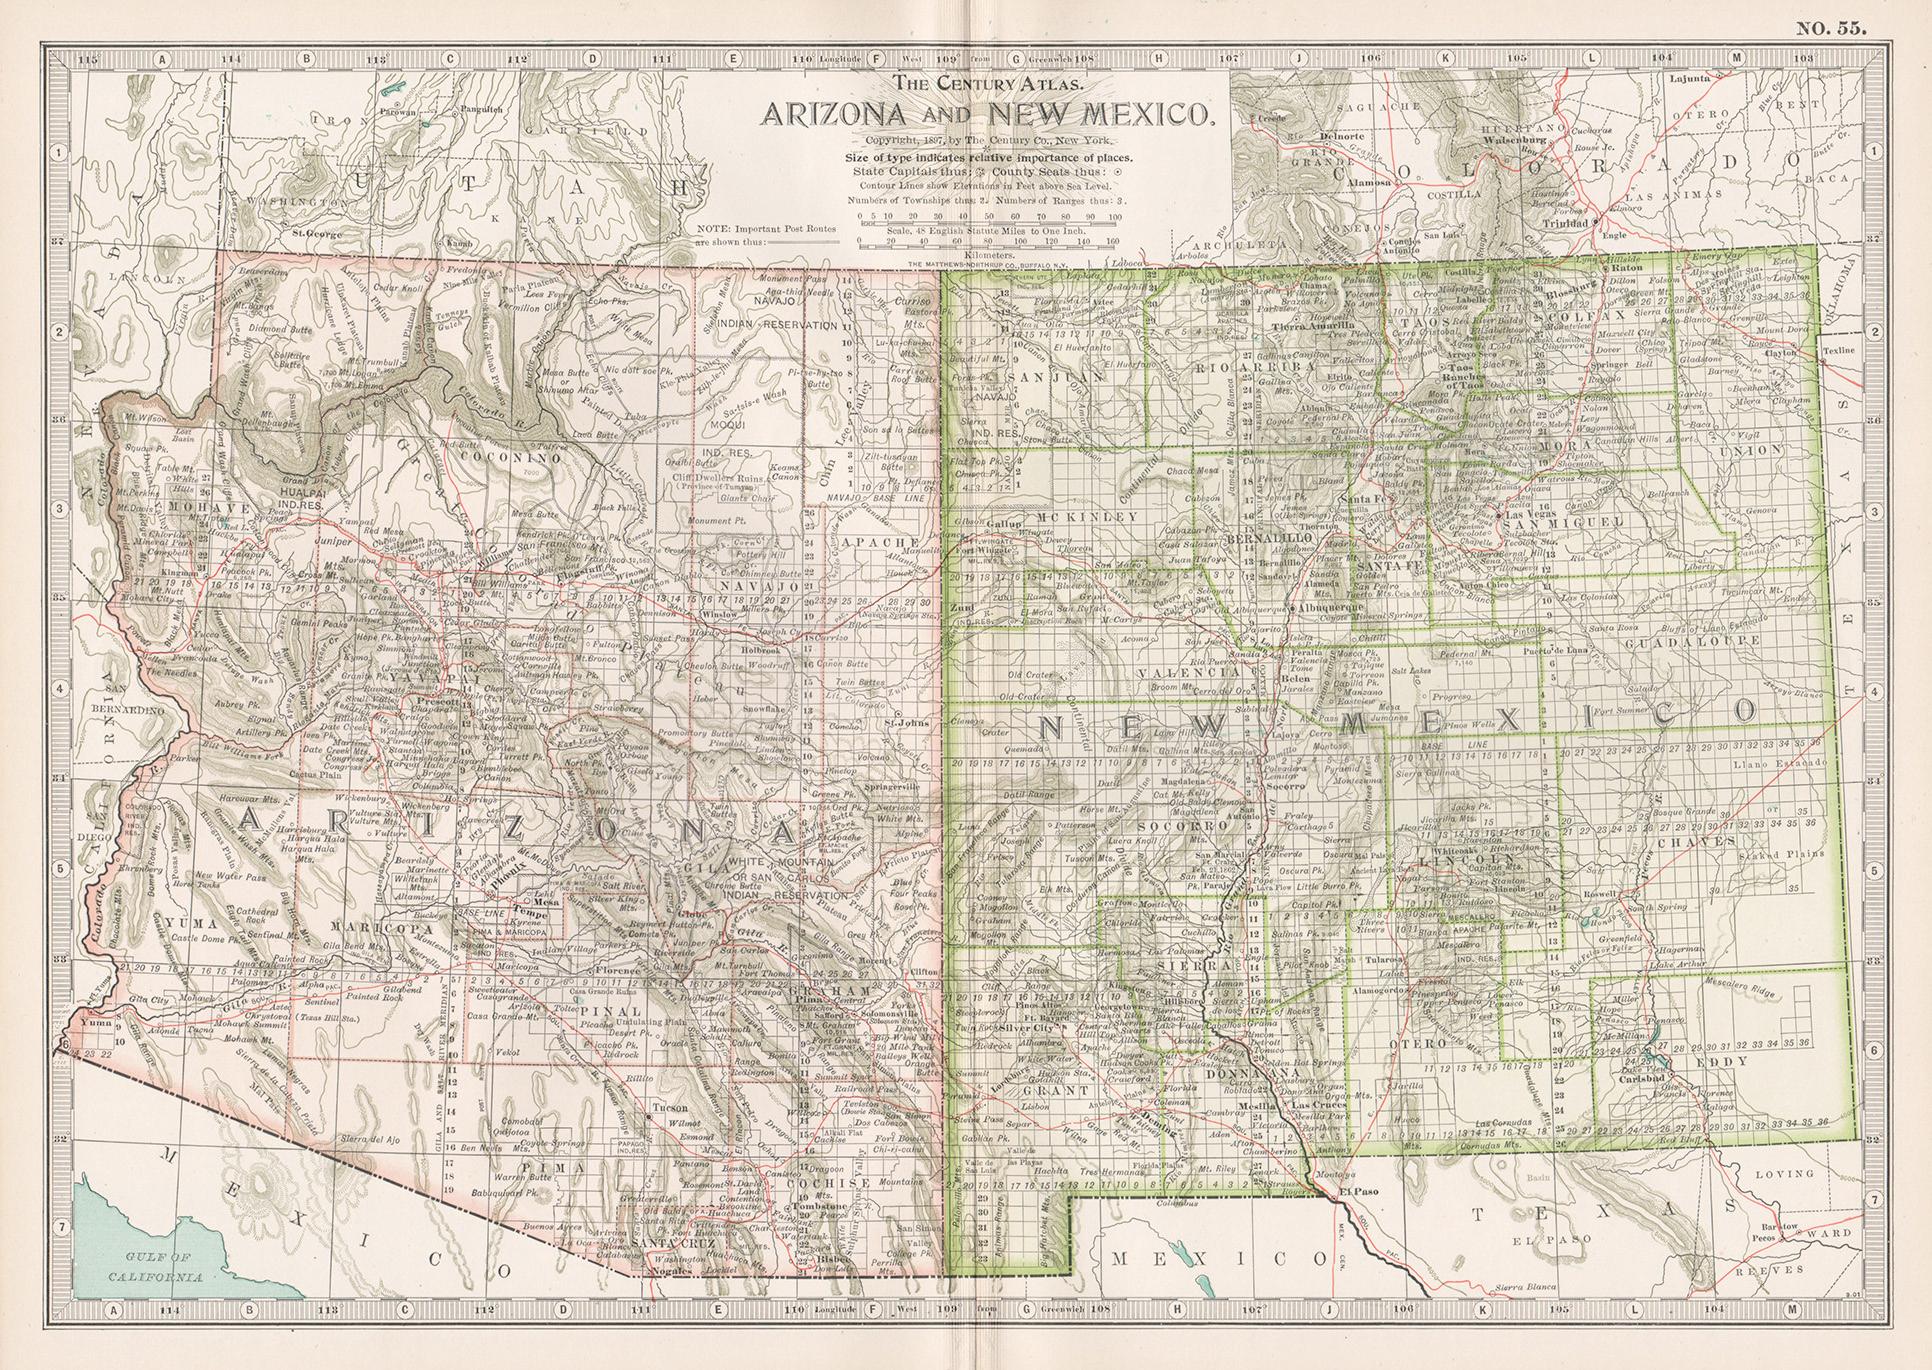 Unknown Print - Arizona and New Mexico. USA. Century Atlas state antique vintage map